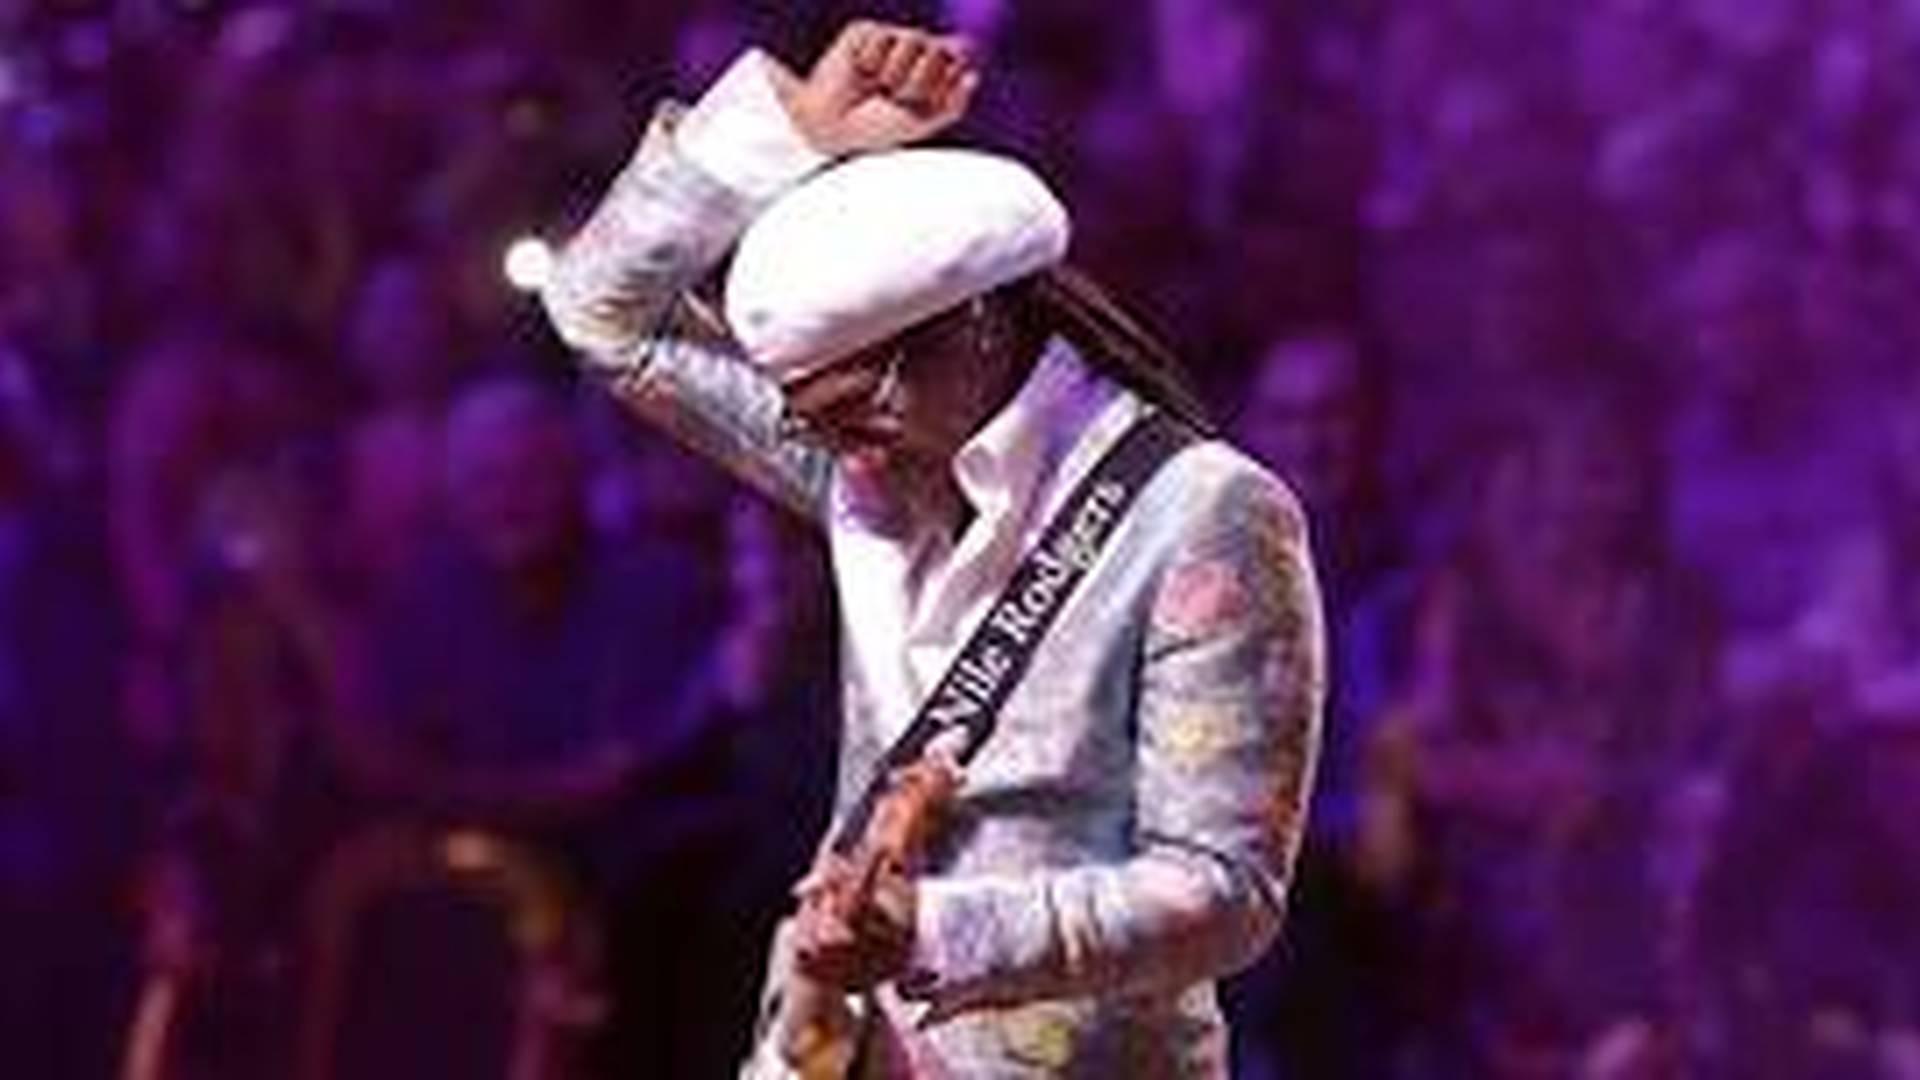 Nile Rodgers & CHIC photo